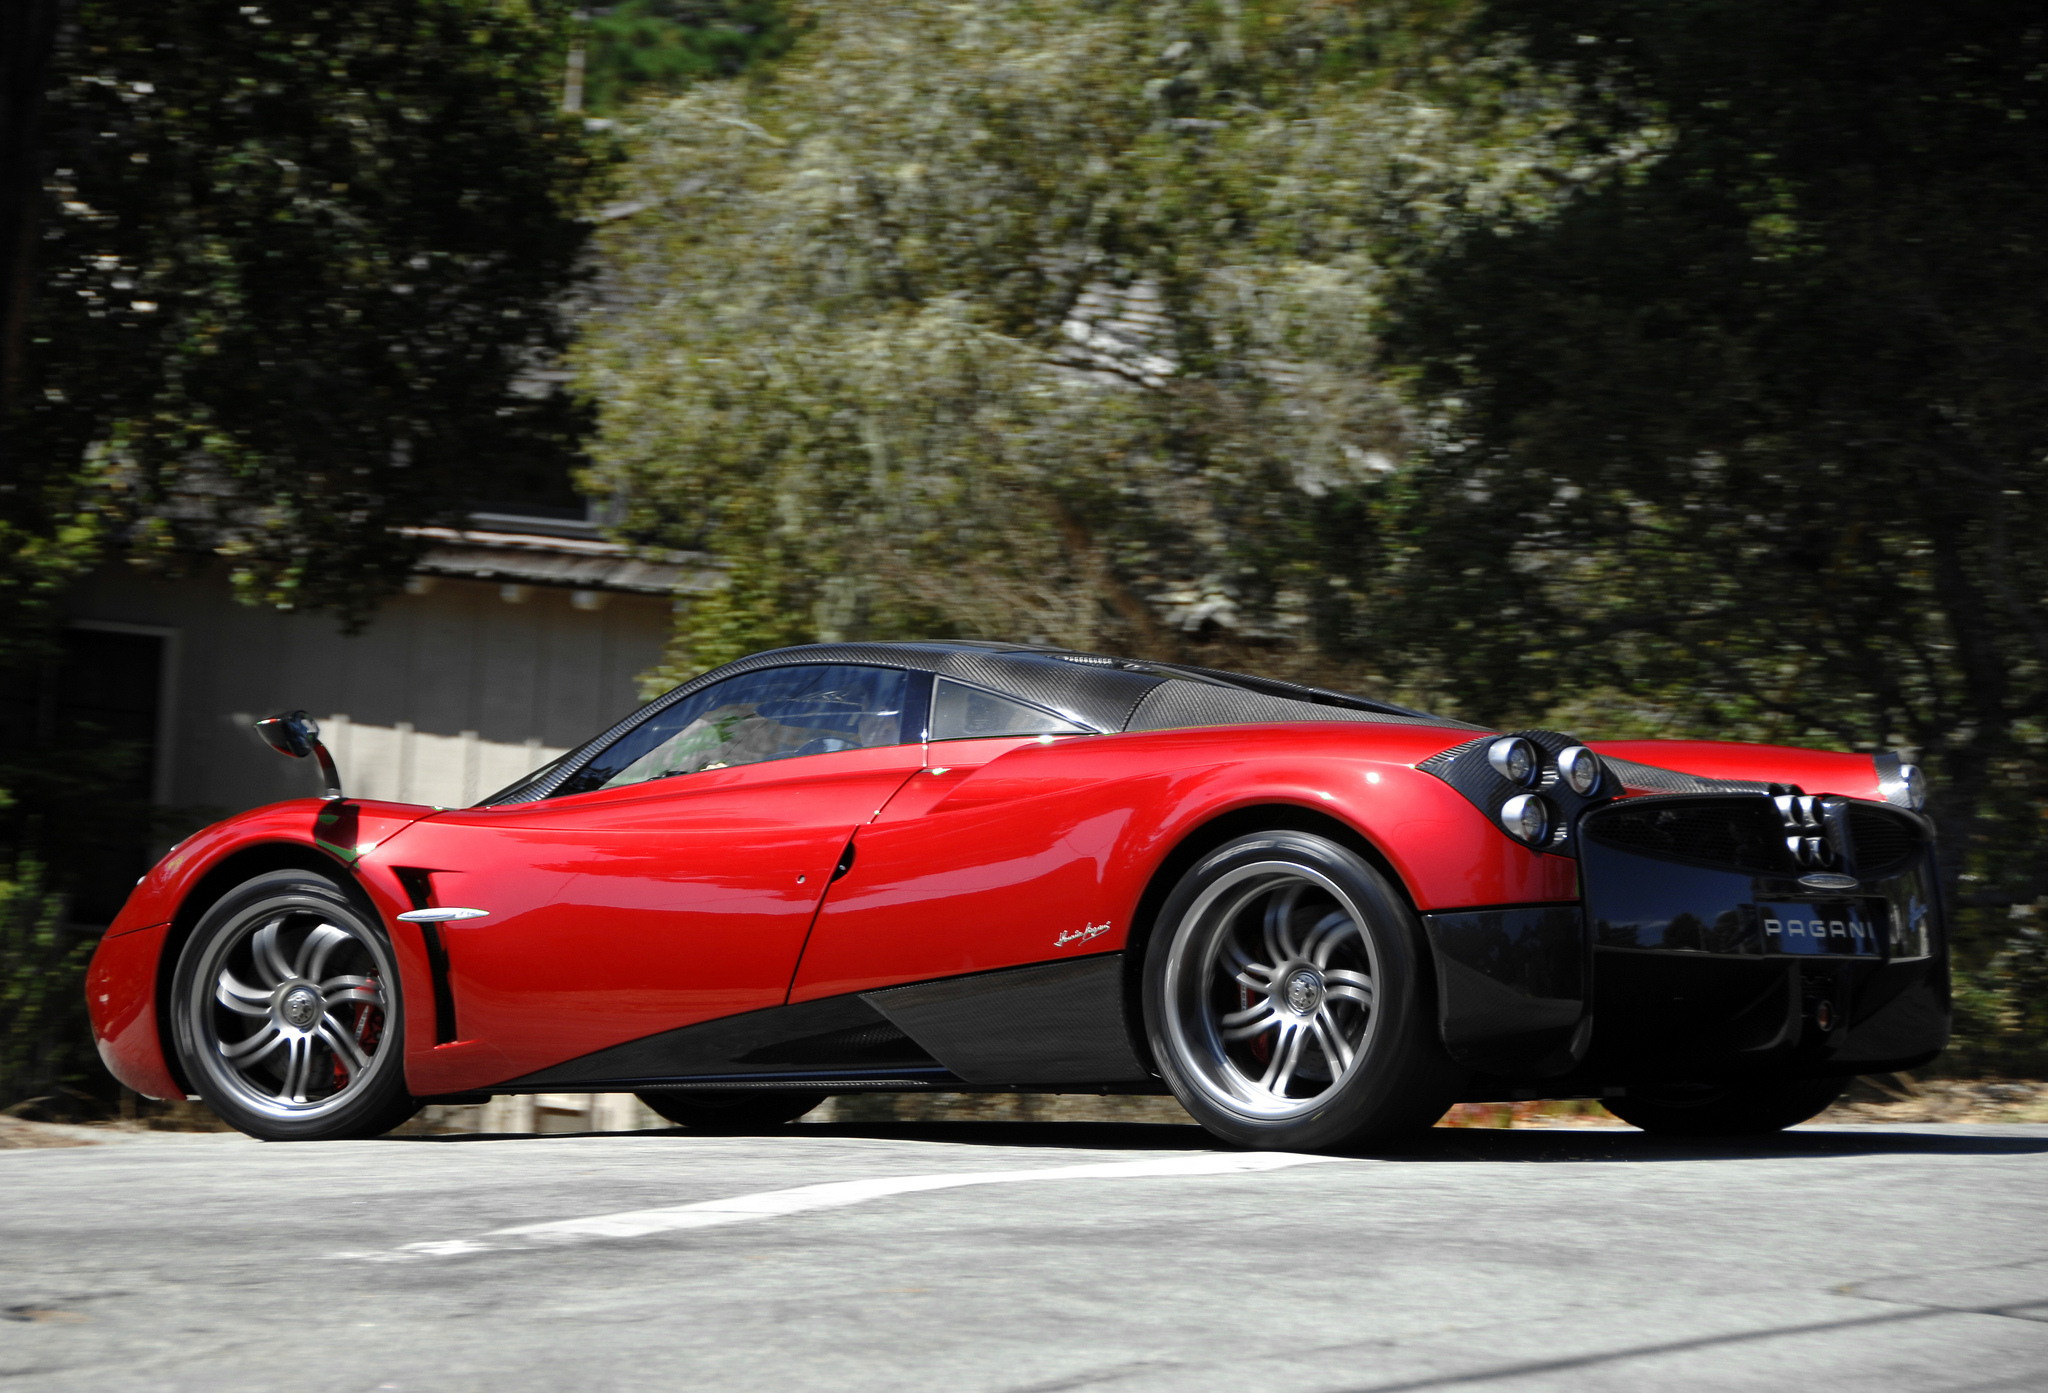 144014 download wallpaper pagani, cars, red, side view, supercar, huayra screensavers and pictures for free